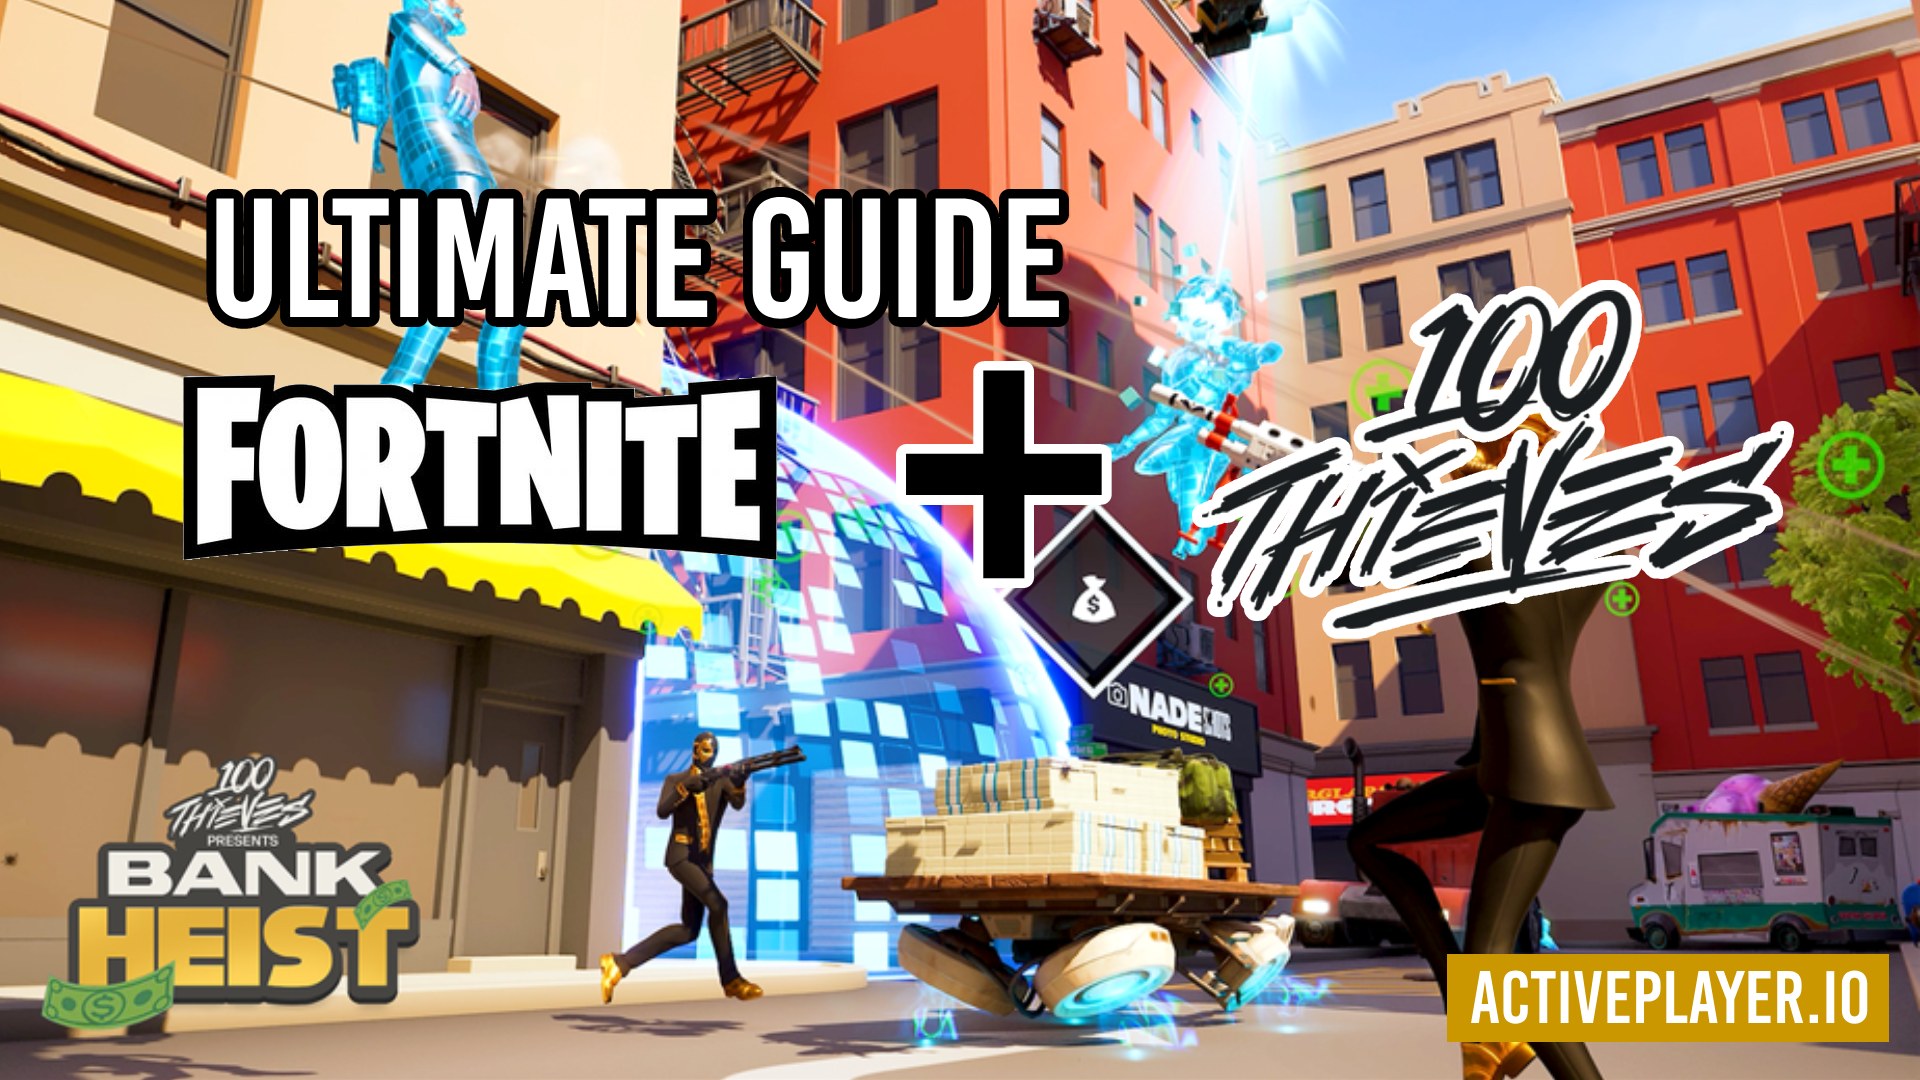 Ultimate Guide: 100 Thieves Bank Heist + Fortnite - The Game